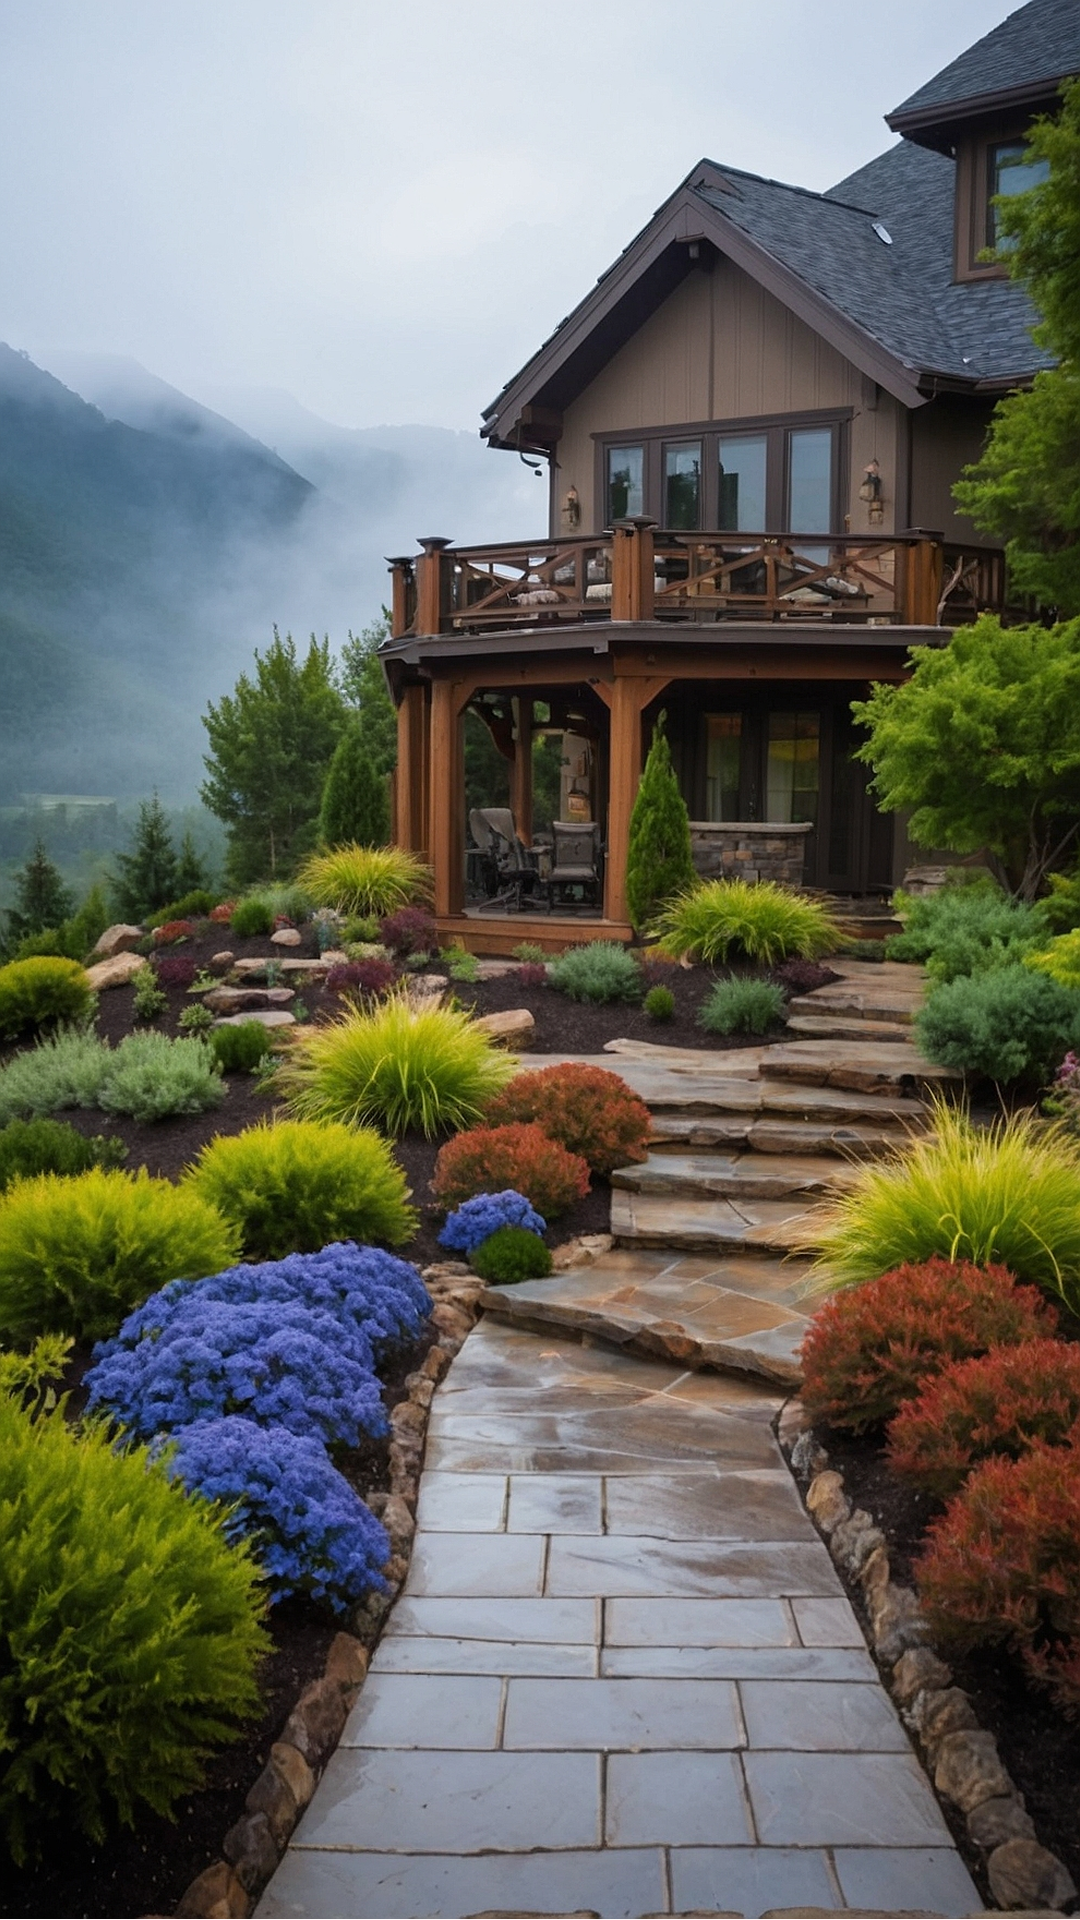 Dazzling Driveway Landscaping Ideas for Homeowners